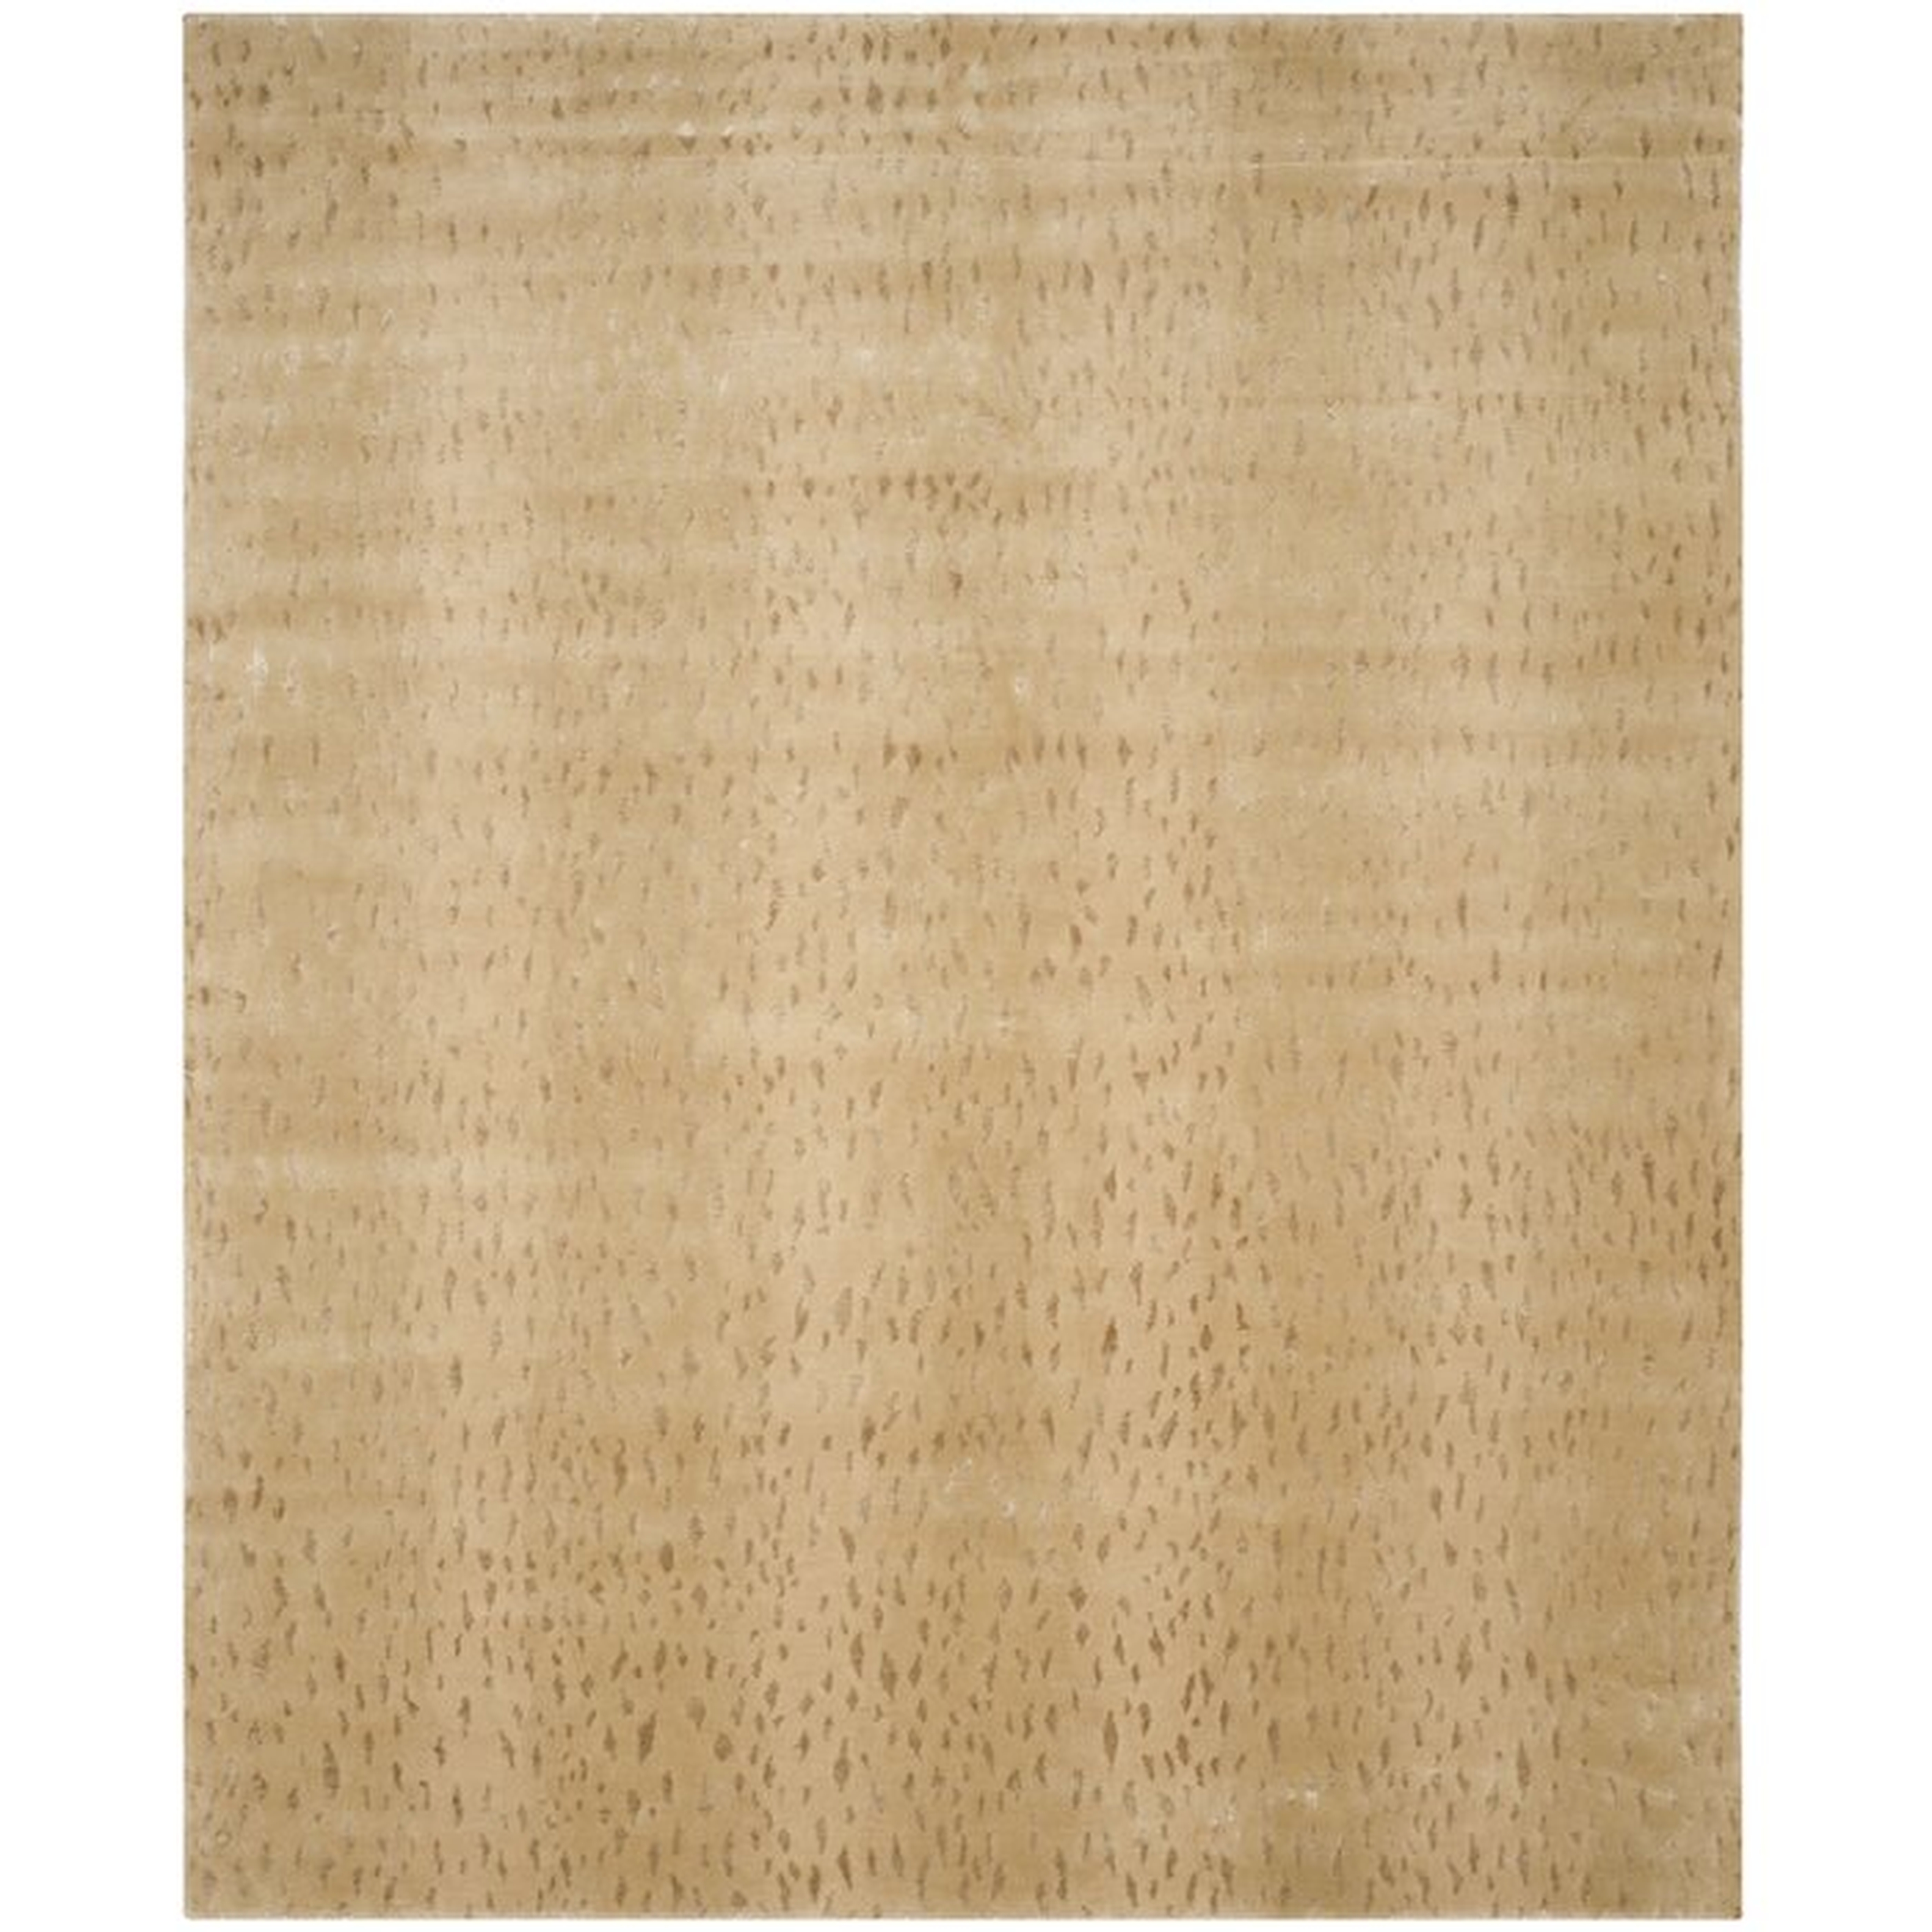 Tibetan Hand-Knotted Wool/Cotton Light Beige Area Rug - Perigold